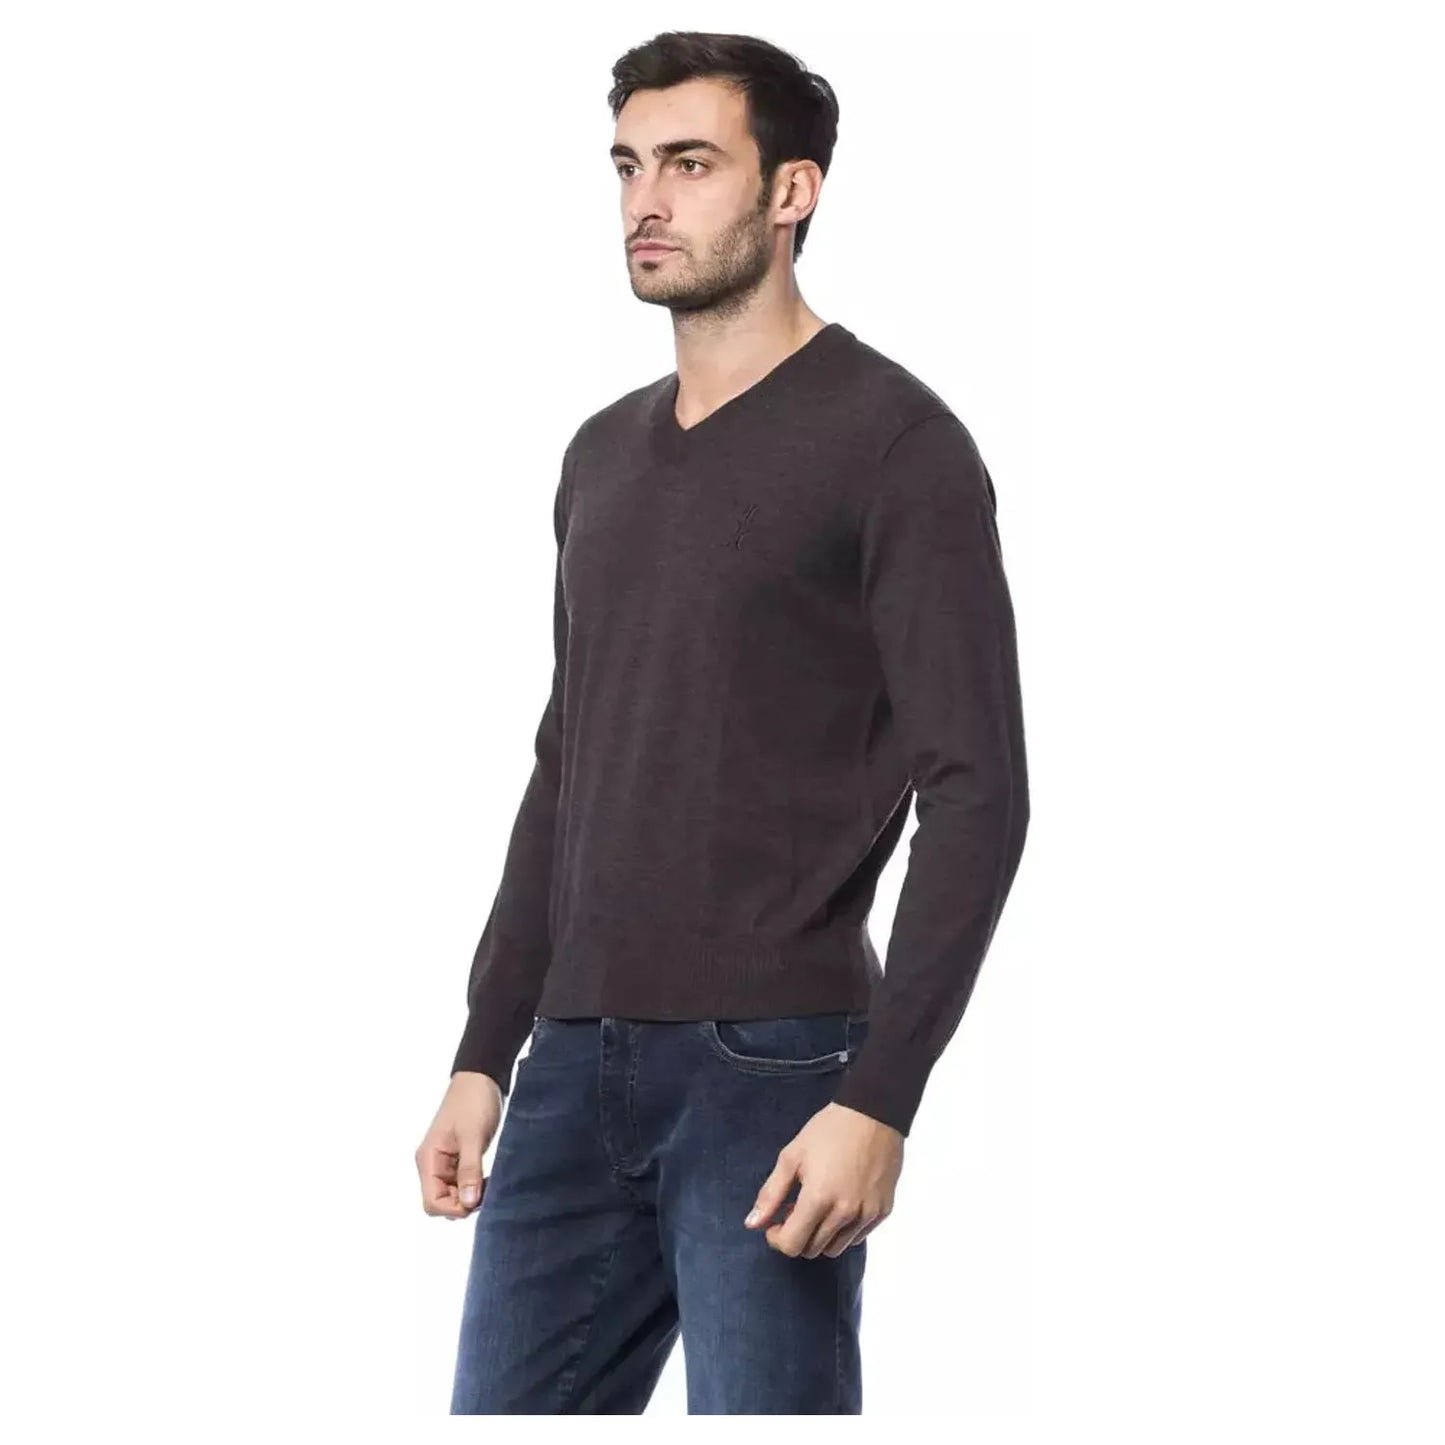 Billionaire Italian Couture Elegant Embroidered Merino Wool Sweater marr-brown-sweater stock_product_image_10491_1732785582-18-07ae96ee-bba.webp